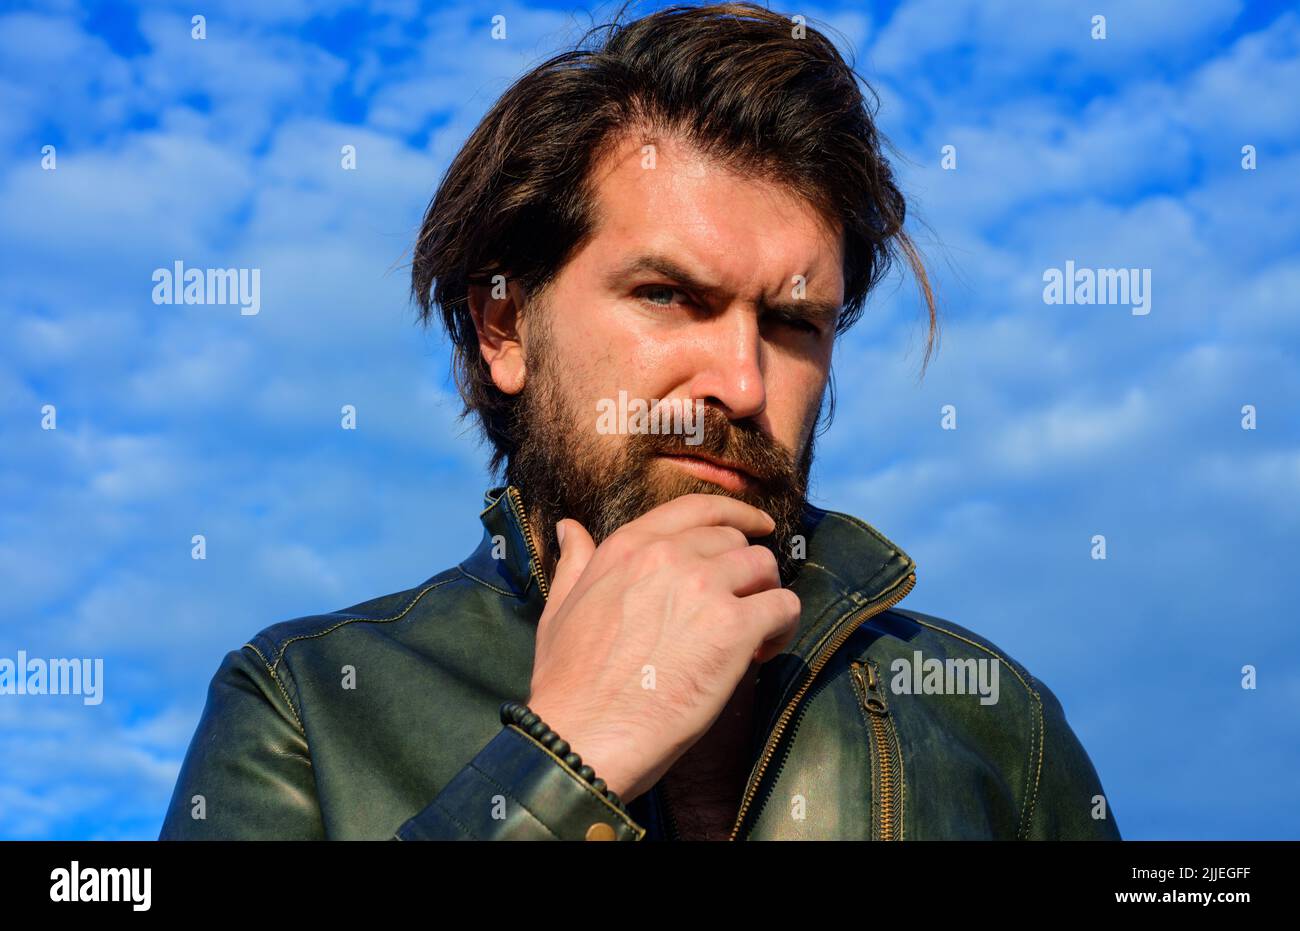 Handsome bearded man in leather jacket. Mens beauty. Fashion male model. Outdoors portrait. Stock Photo